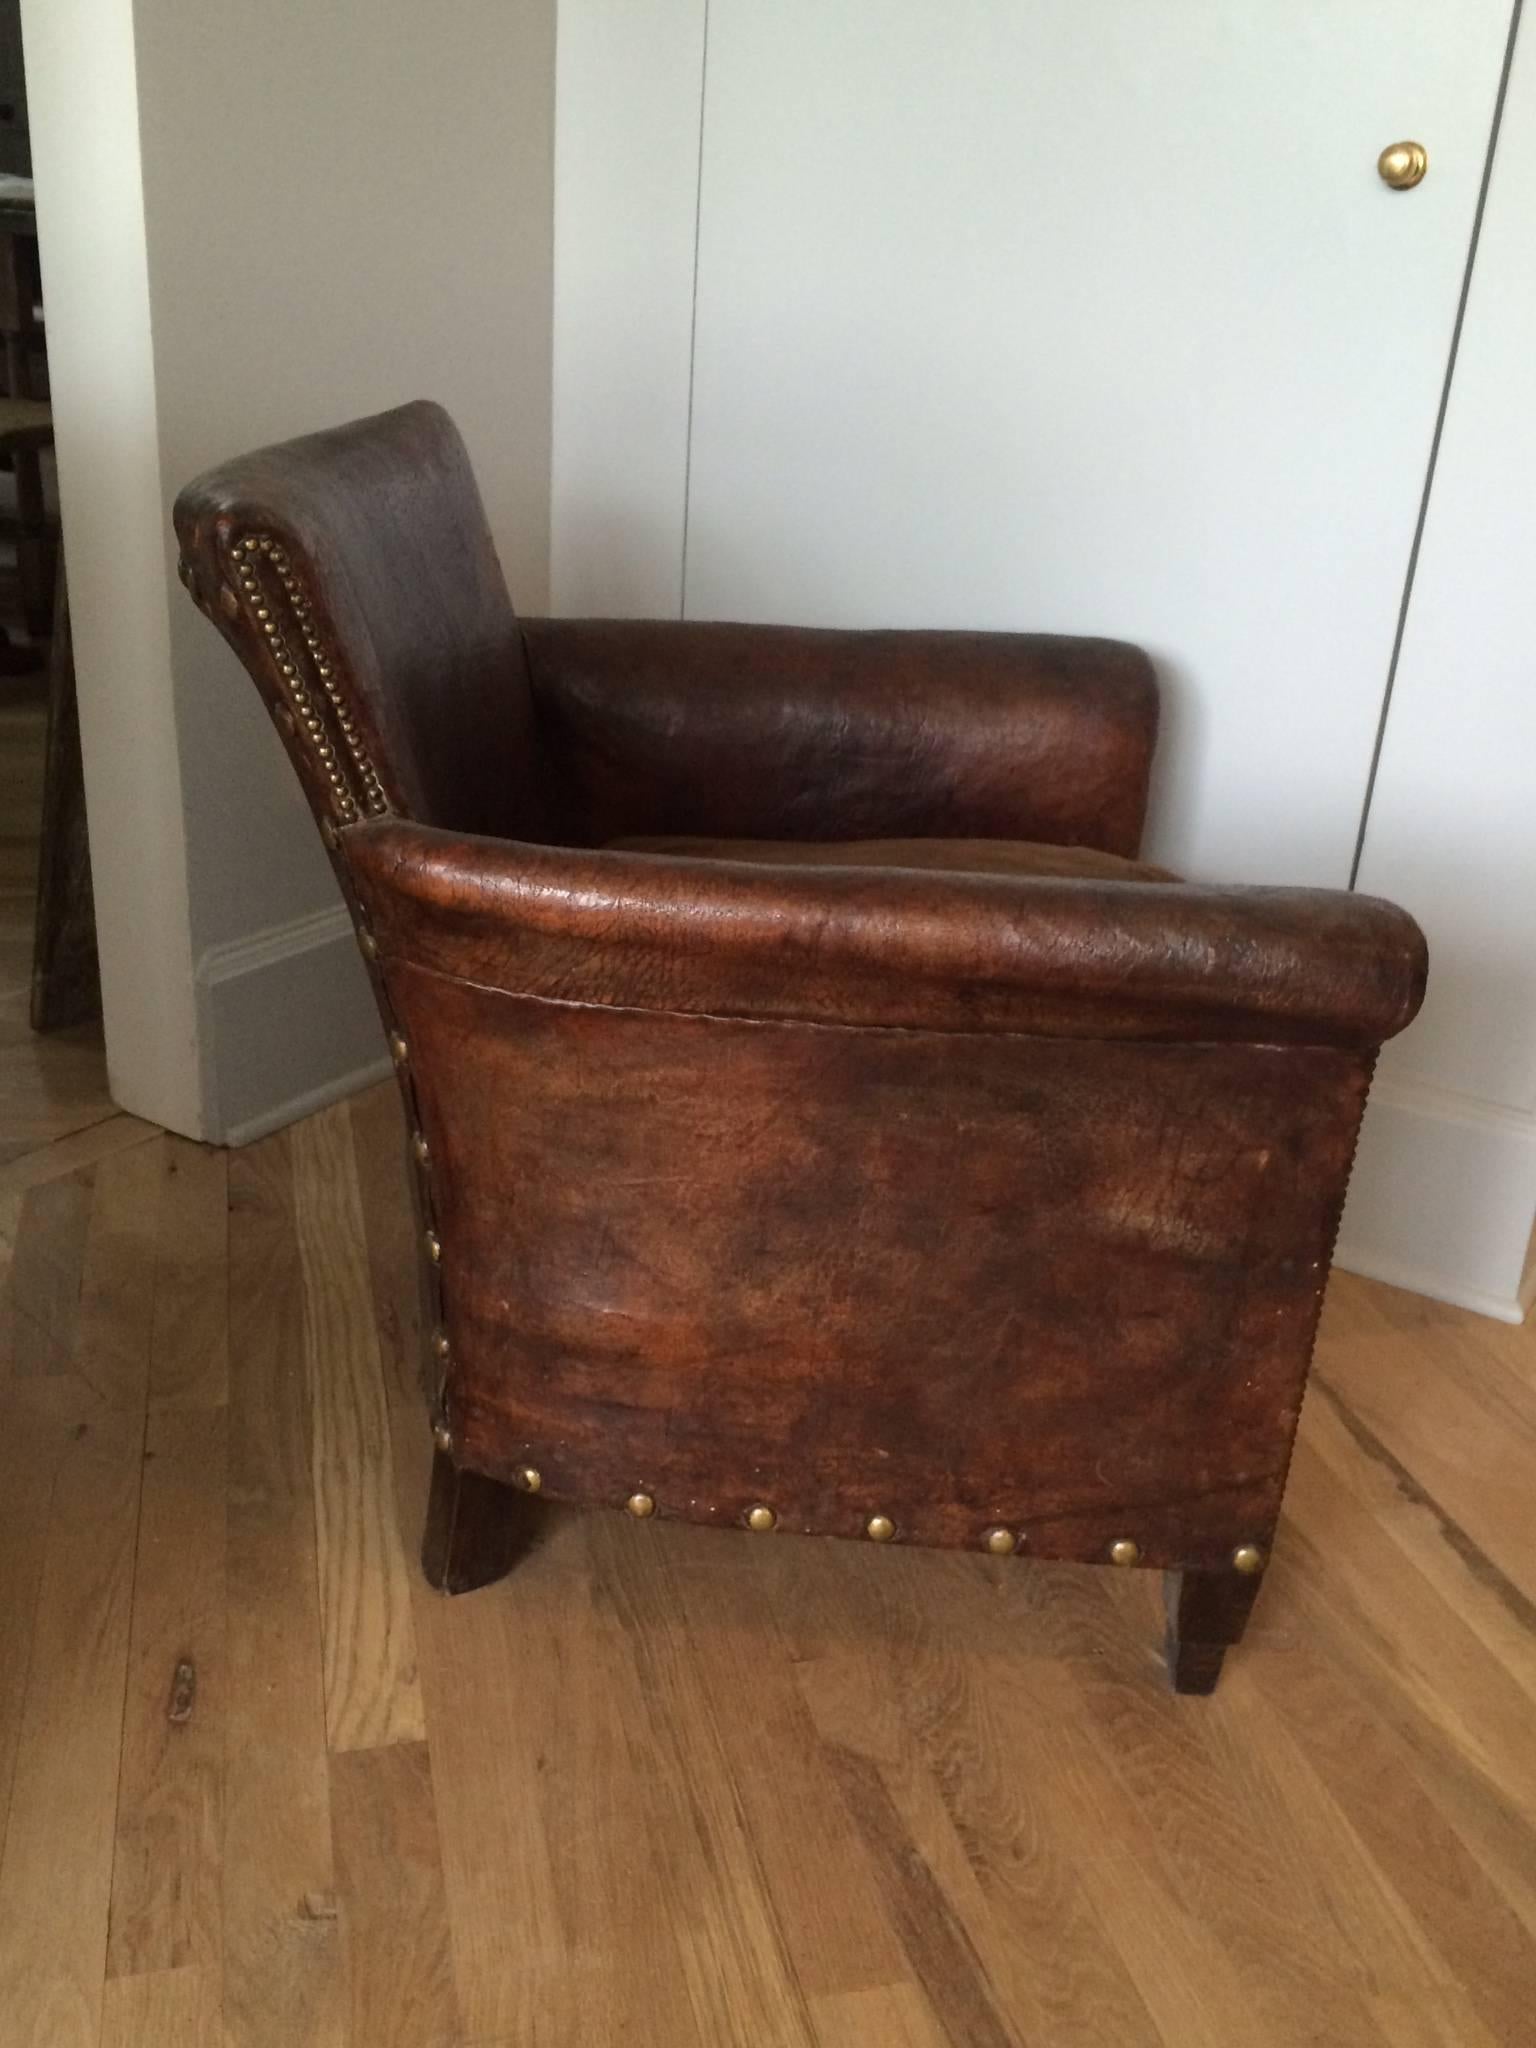 Wonderful patina on this all original leather club chair with large brass nailheads. Very comfortable original down filled velvet cushion.